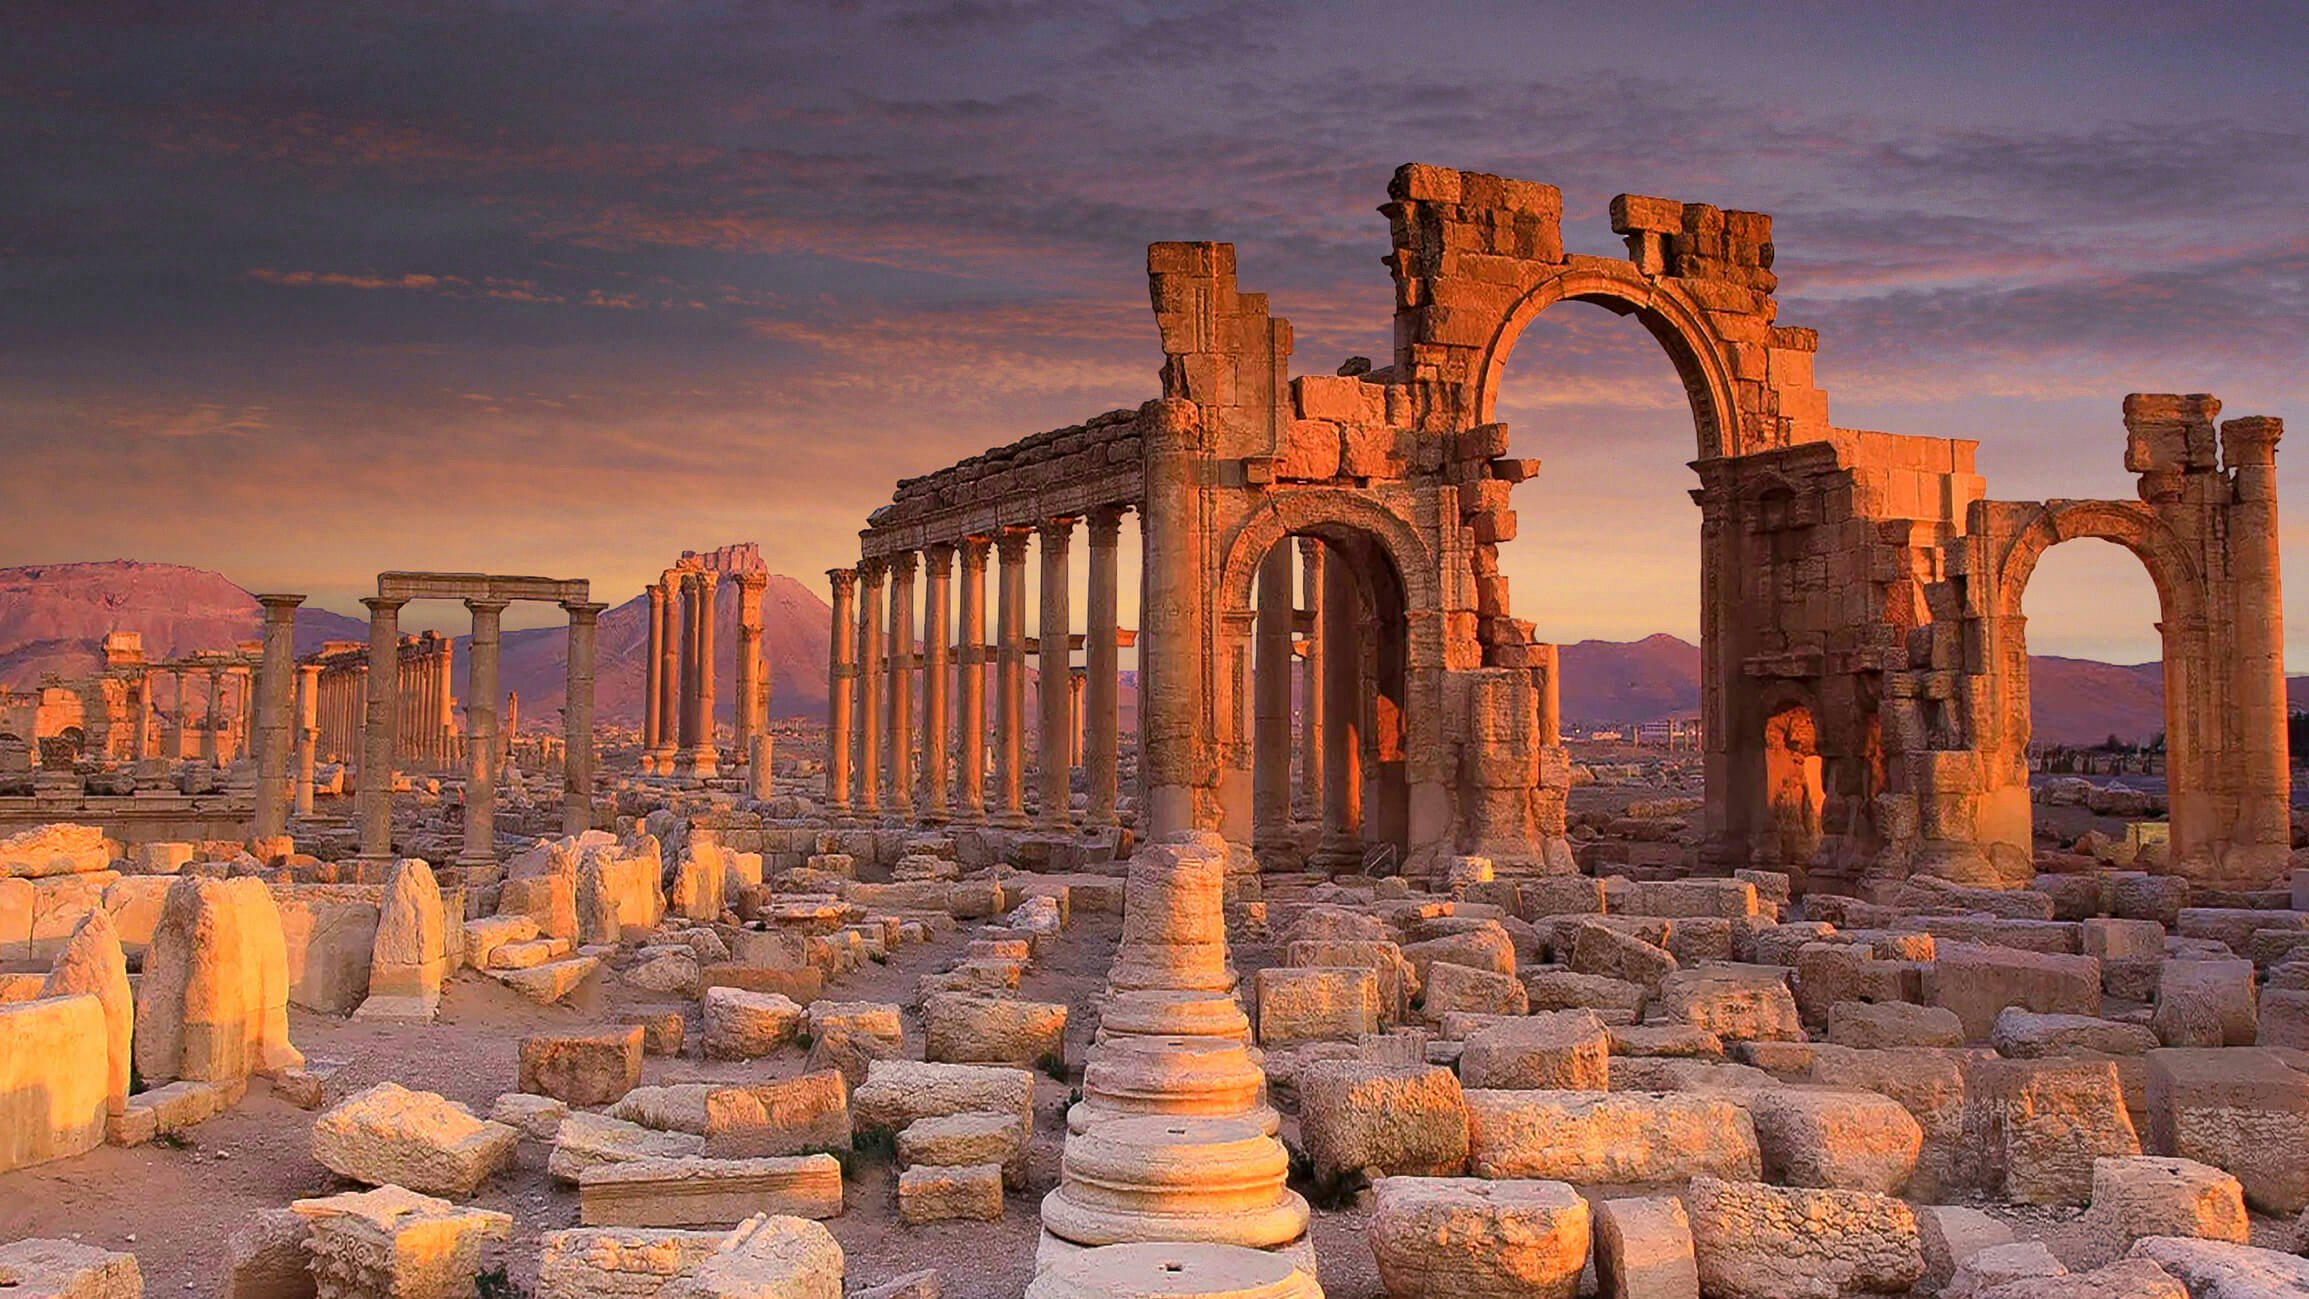 Syria's ancient city of Palmyra may open for tourists again in 2019